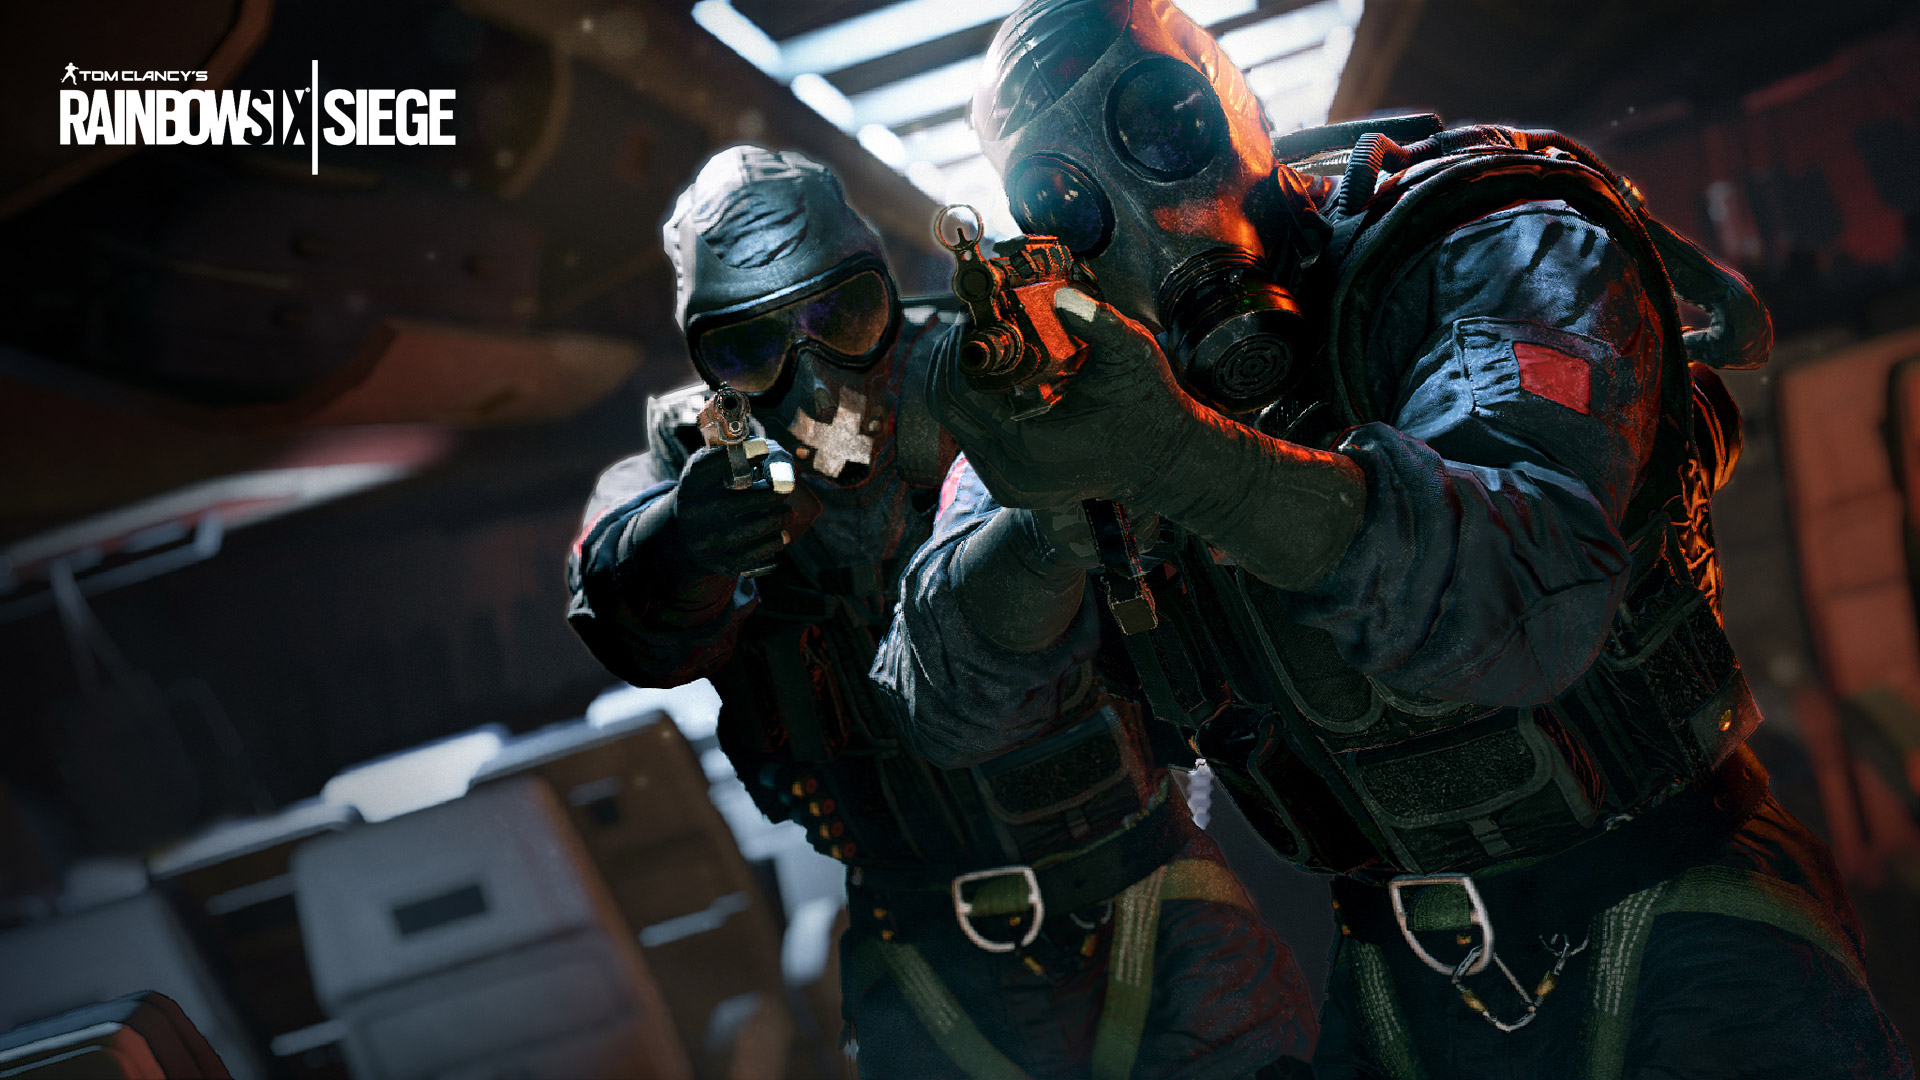 Free Download Rainbow Six Siege Wallpaper In 1920x1080 1920x1080 For